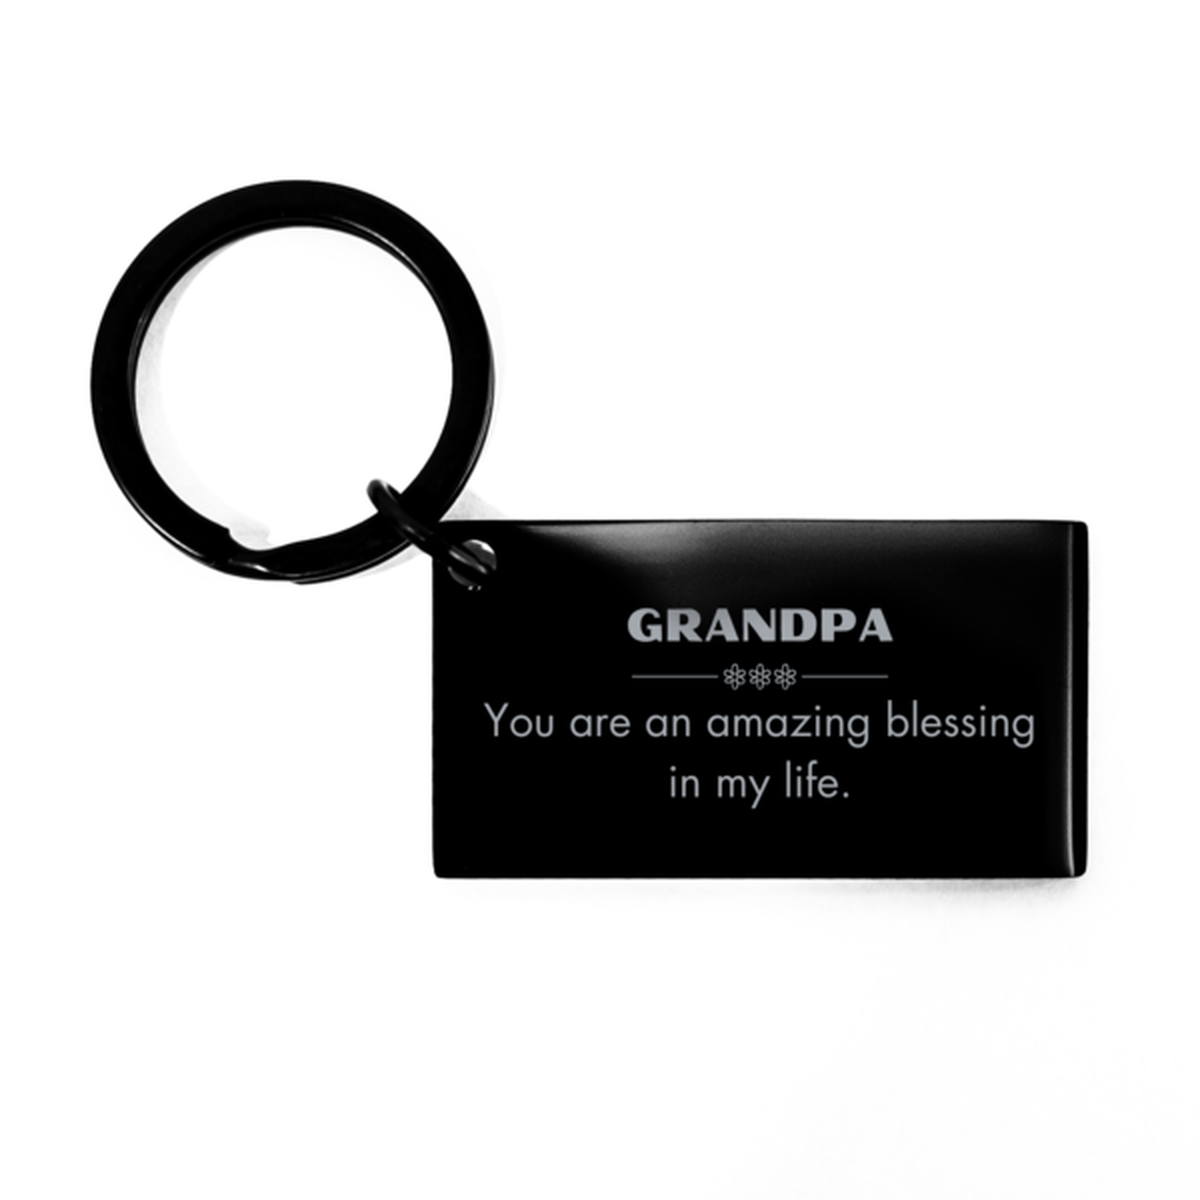 Grandpa Keychain, You are an amazing blessing in my life, Thank You Gifts For Grandpa, Inspirational Birthday Christmas Unique Gifts For Grandpa